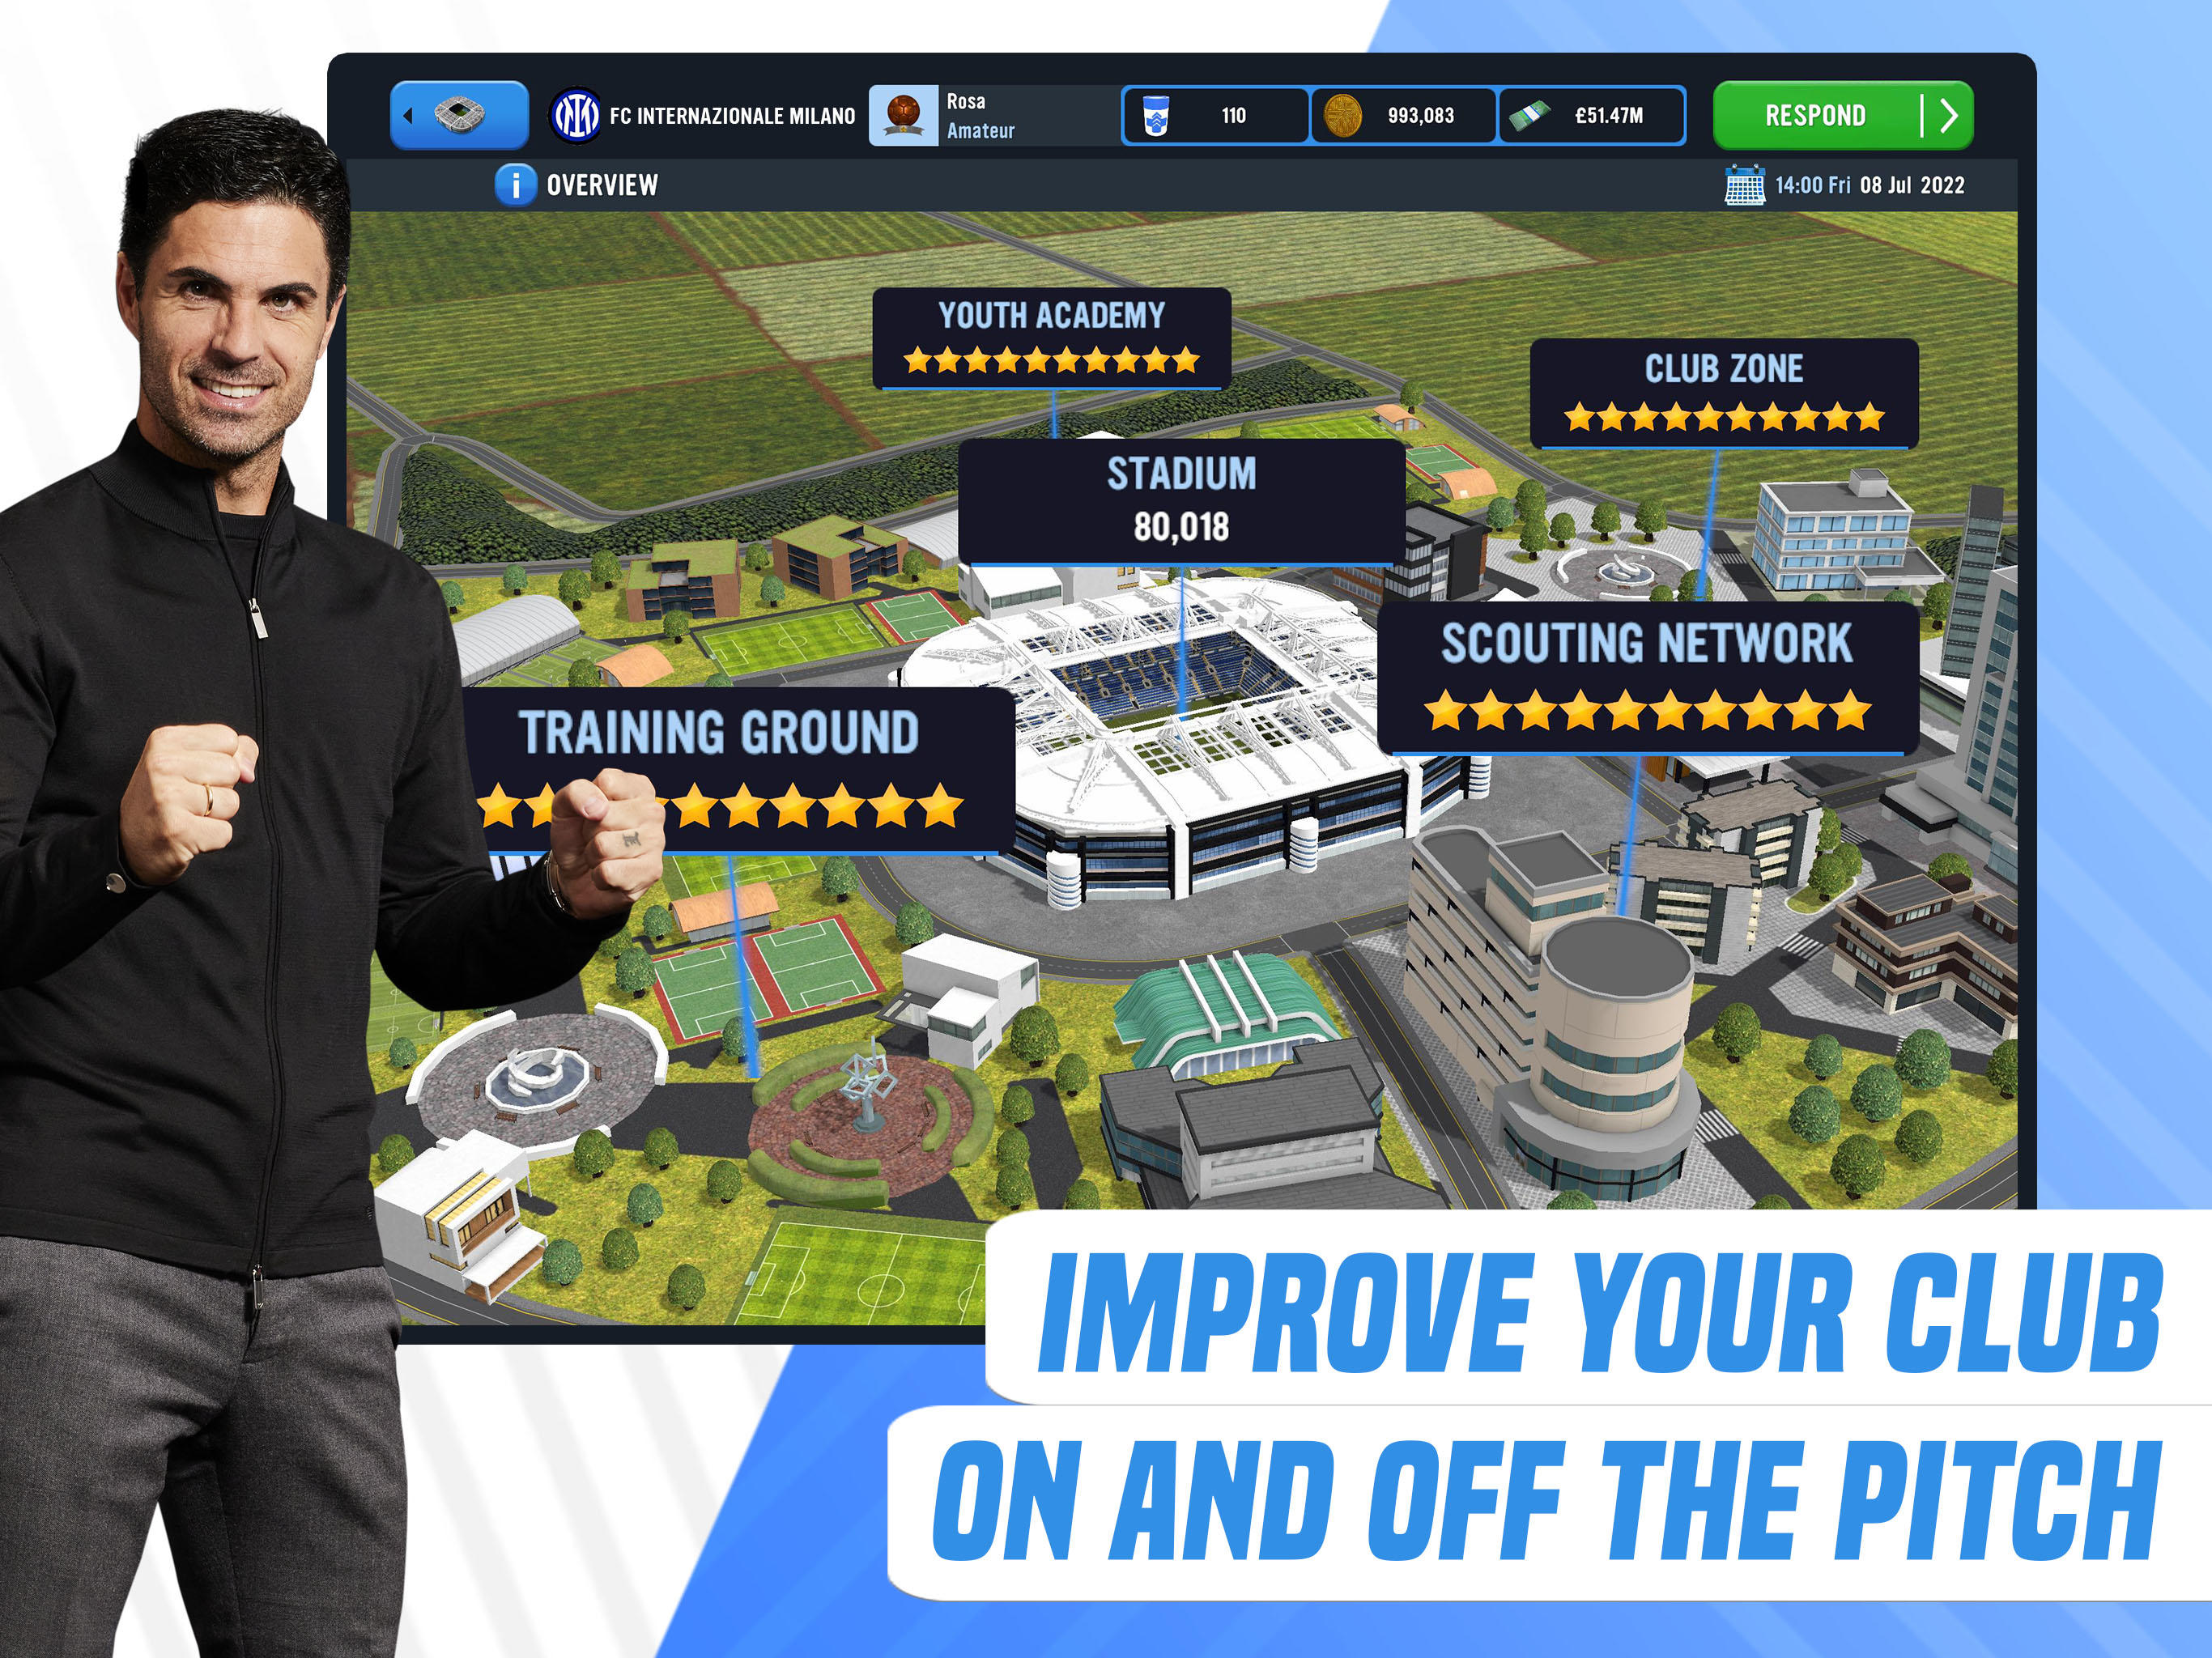 Download Soccer Manager 2023 3.2.0 for Android